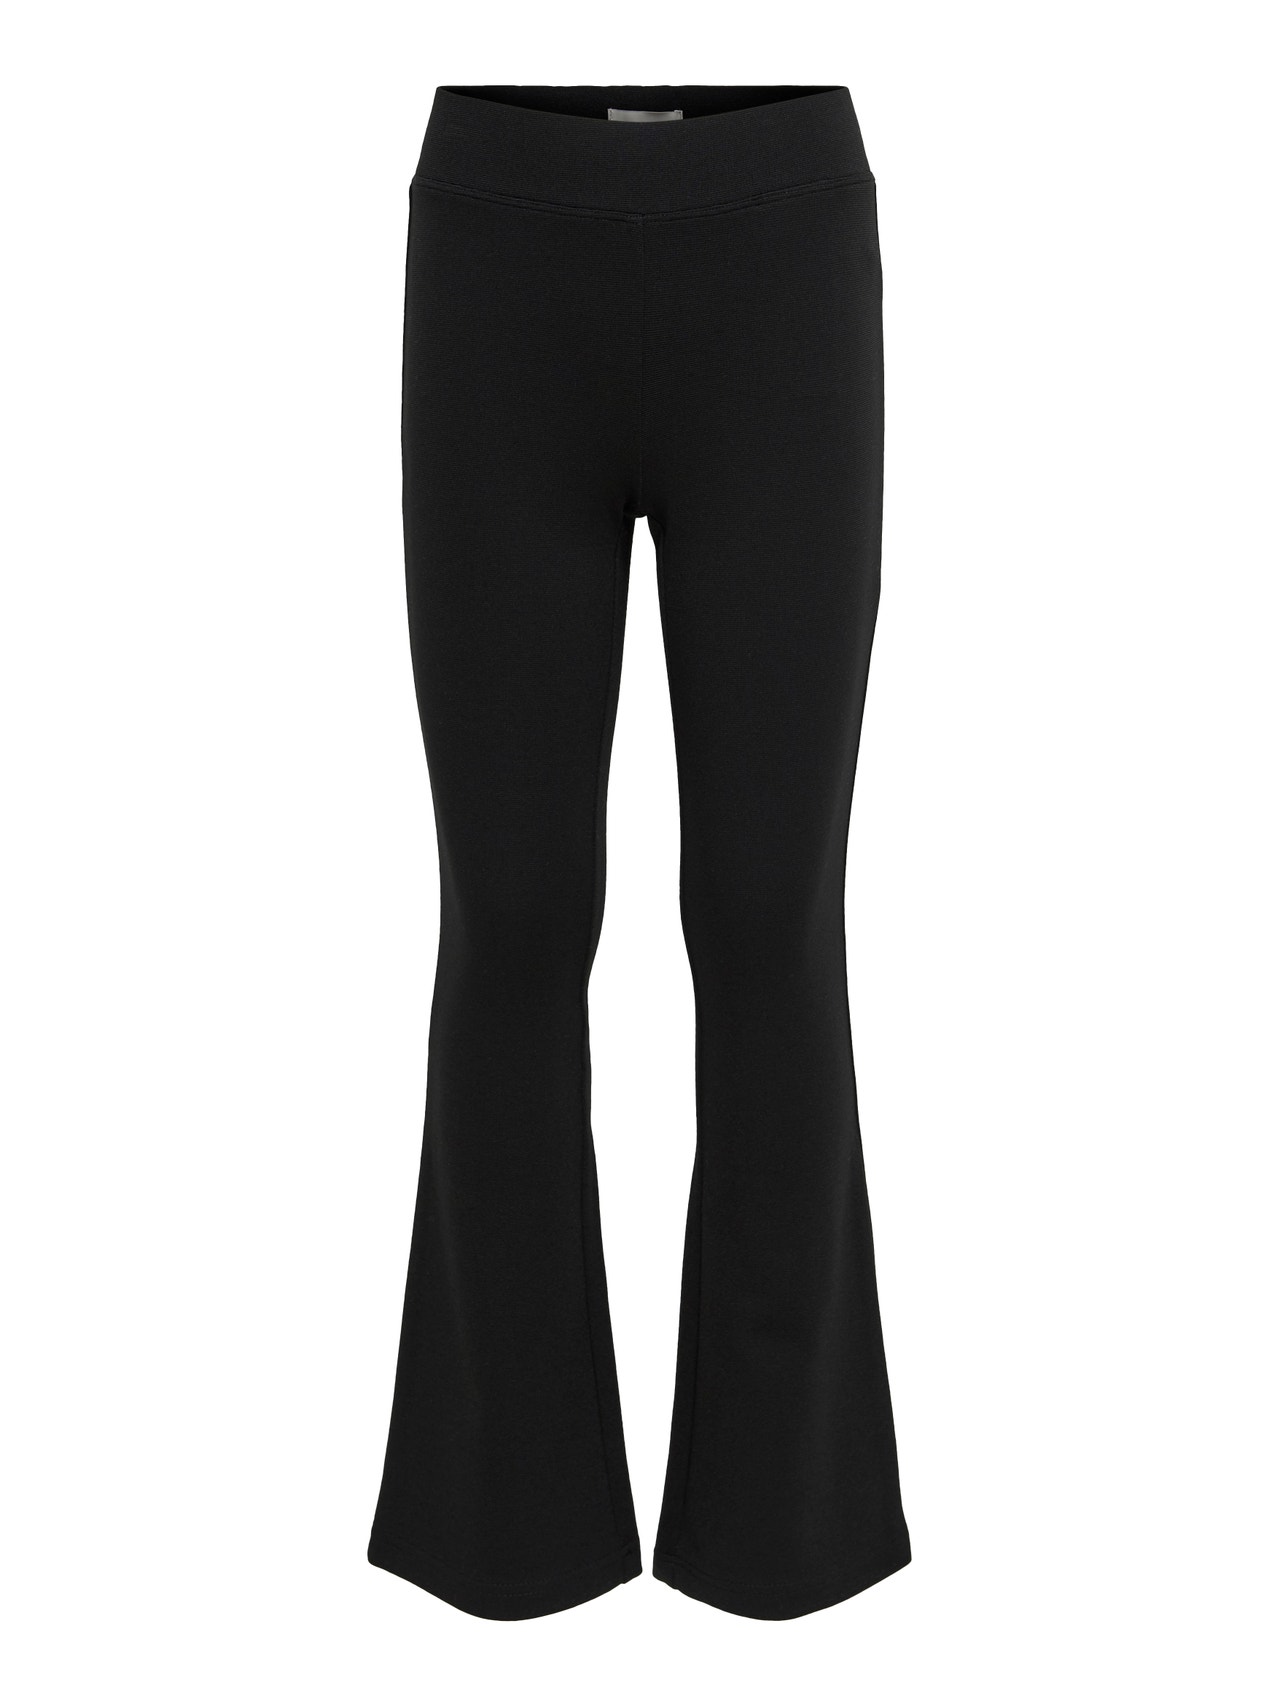 ONLY Flared Fit Flared legs Trousers -Black - 15193010